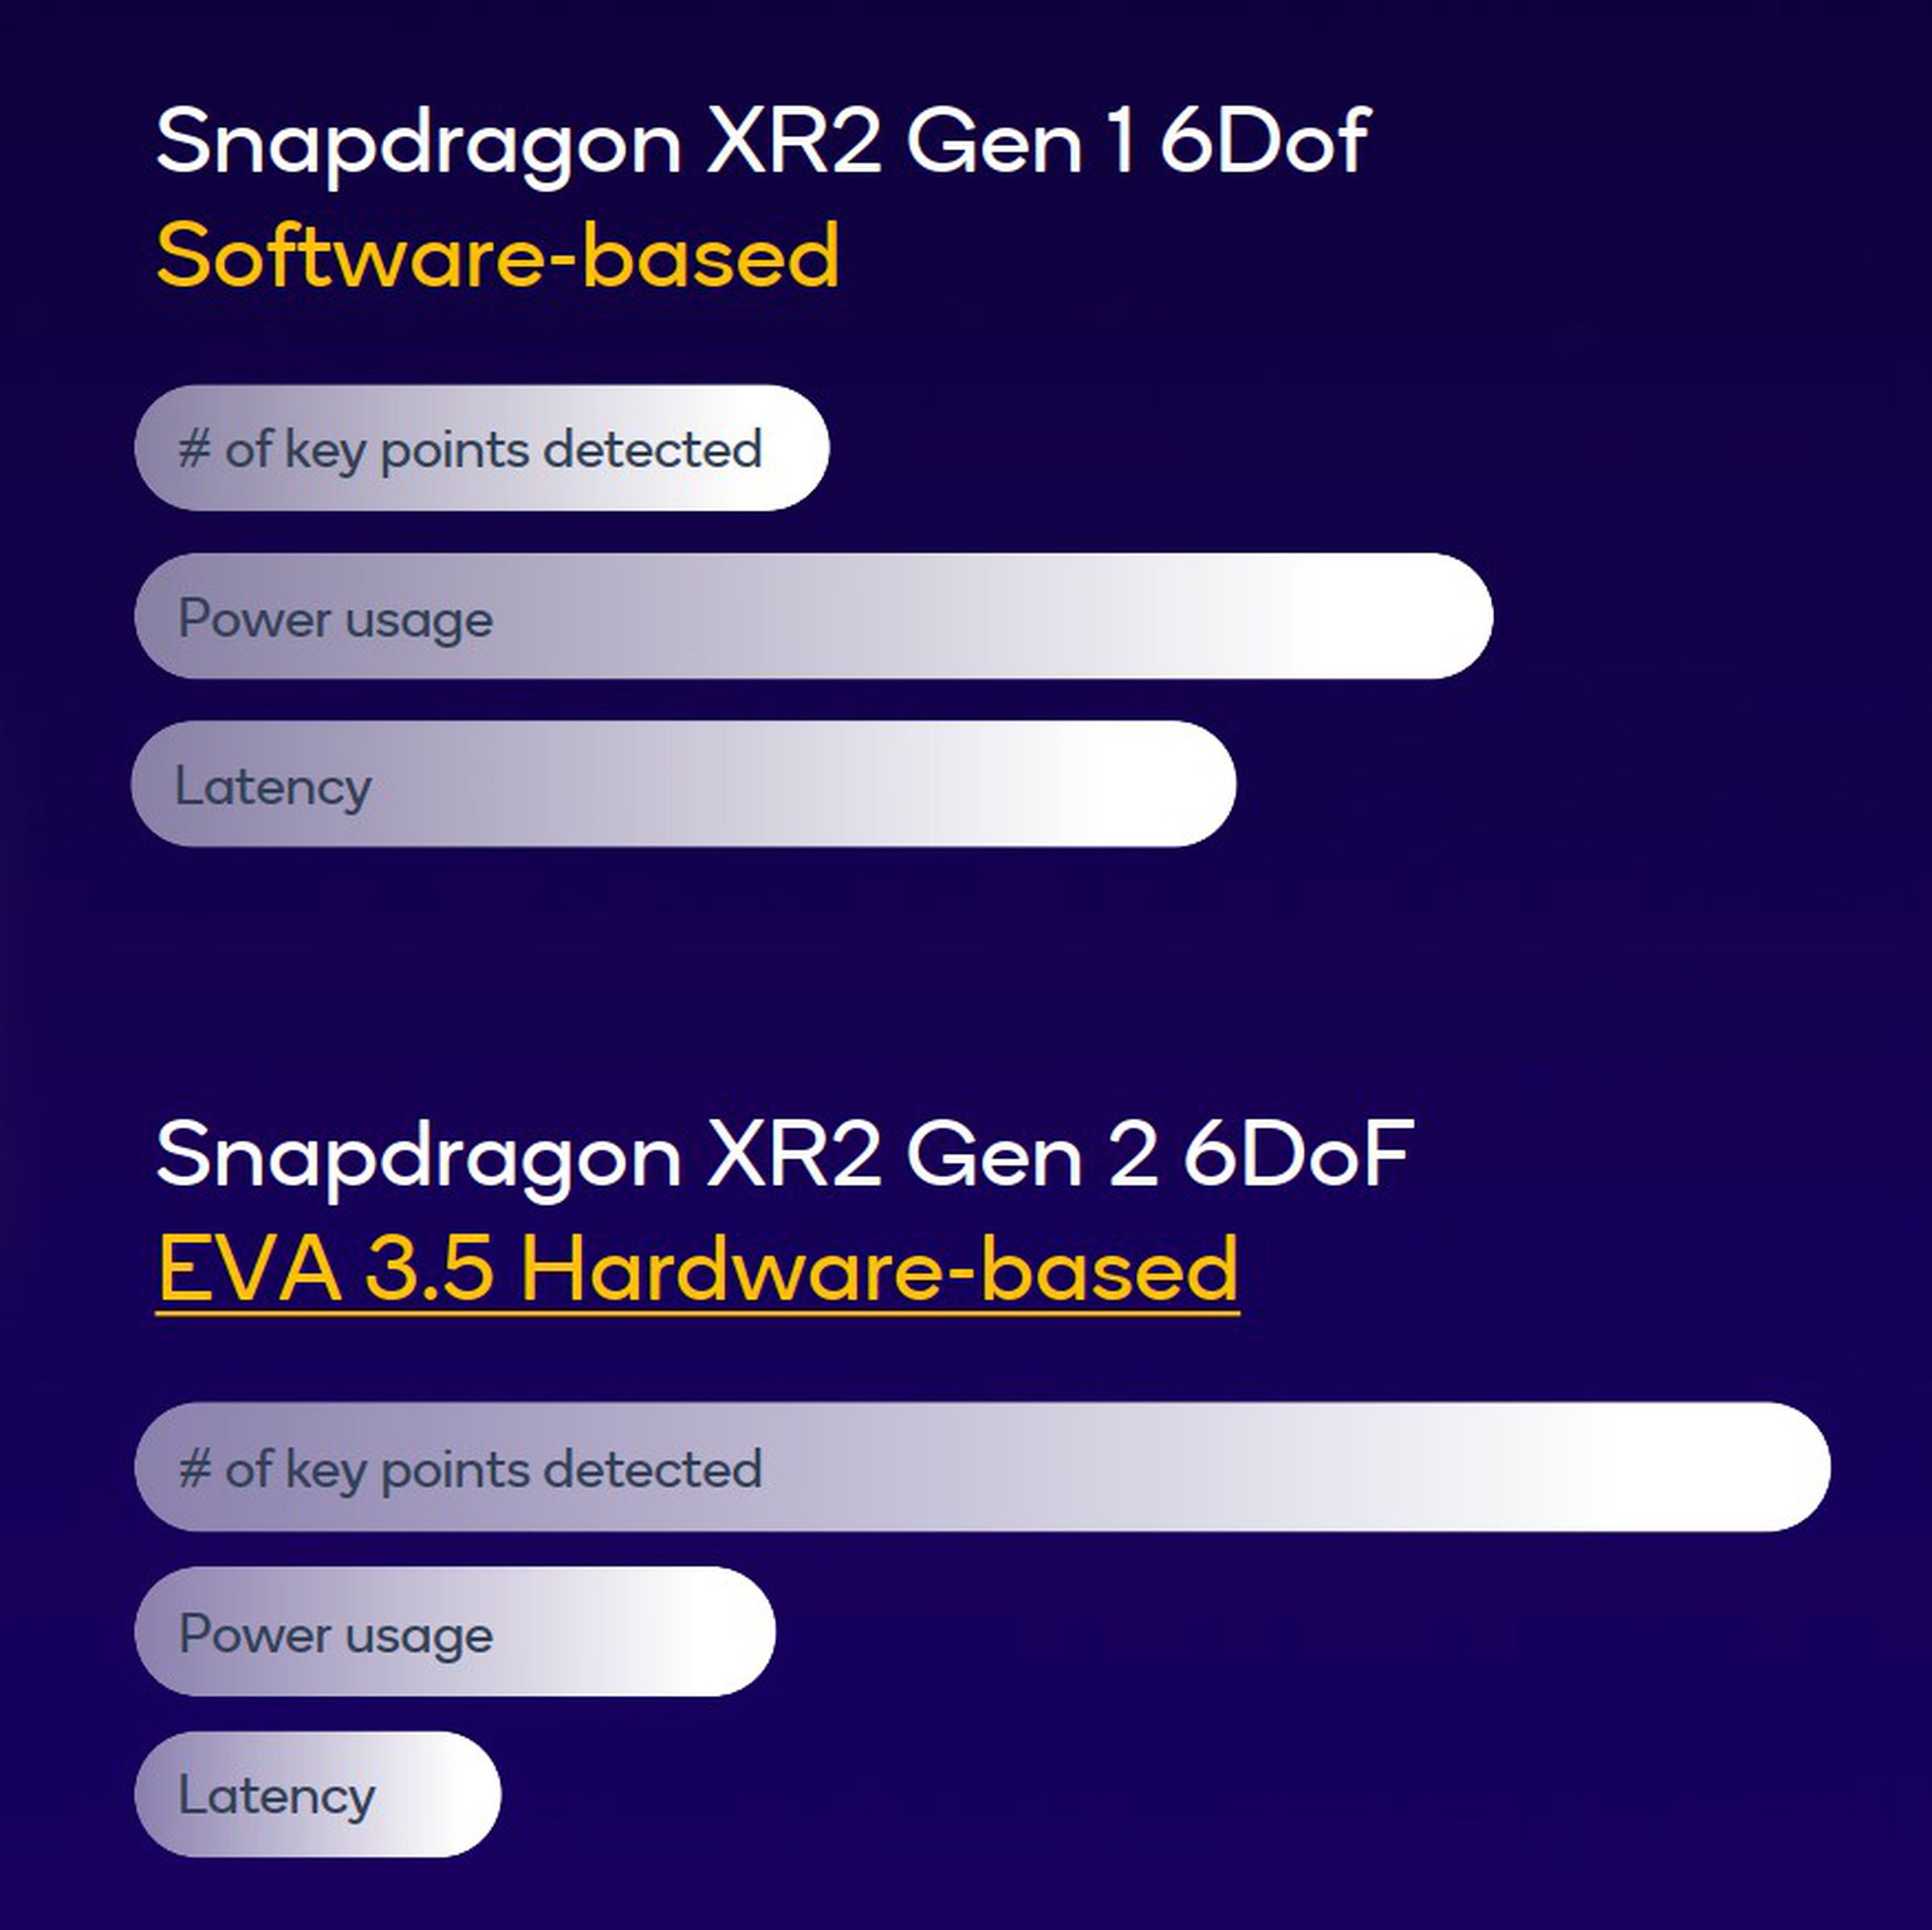 “Leveraging a custom XR design in the Visual Analysis Engine (EVA), Snapdragon XR2 Gen 2 accomplishes over 50% power and latency reduction compared to the software-based solution for XR2 Gen 1,” says Qualcomm